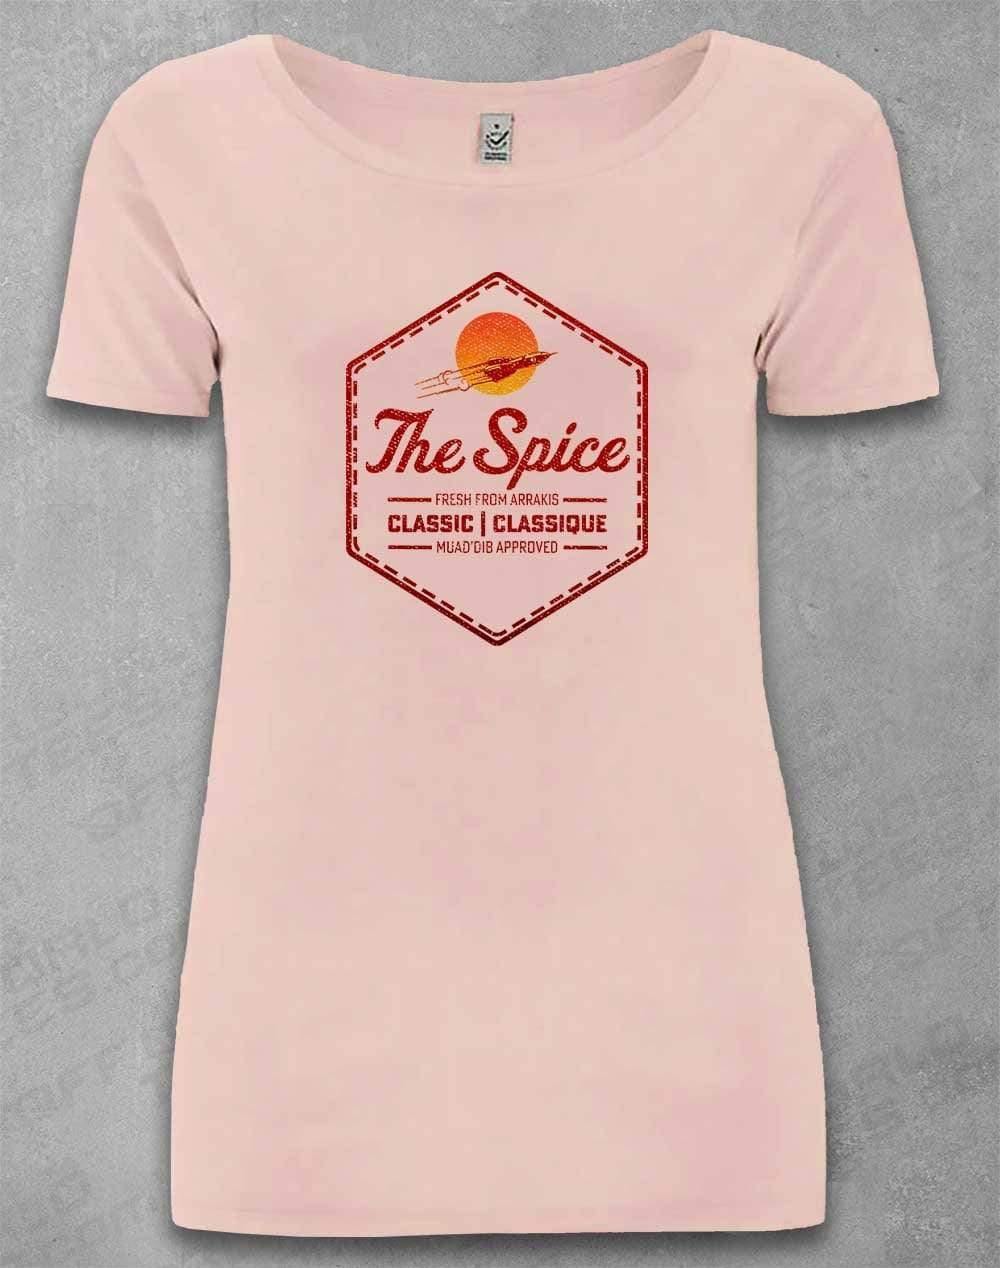 DELUXE The Spice Retro Logo Organic Scoop Neck T-Shirt 8-10 / Light Pink  - Off World Tees